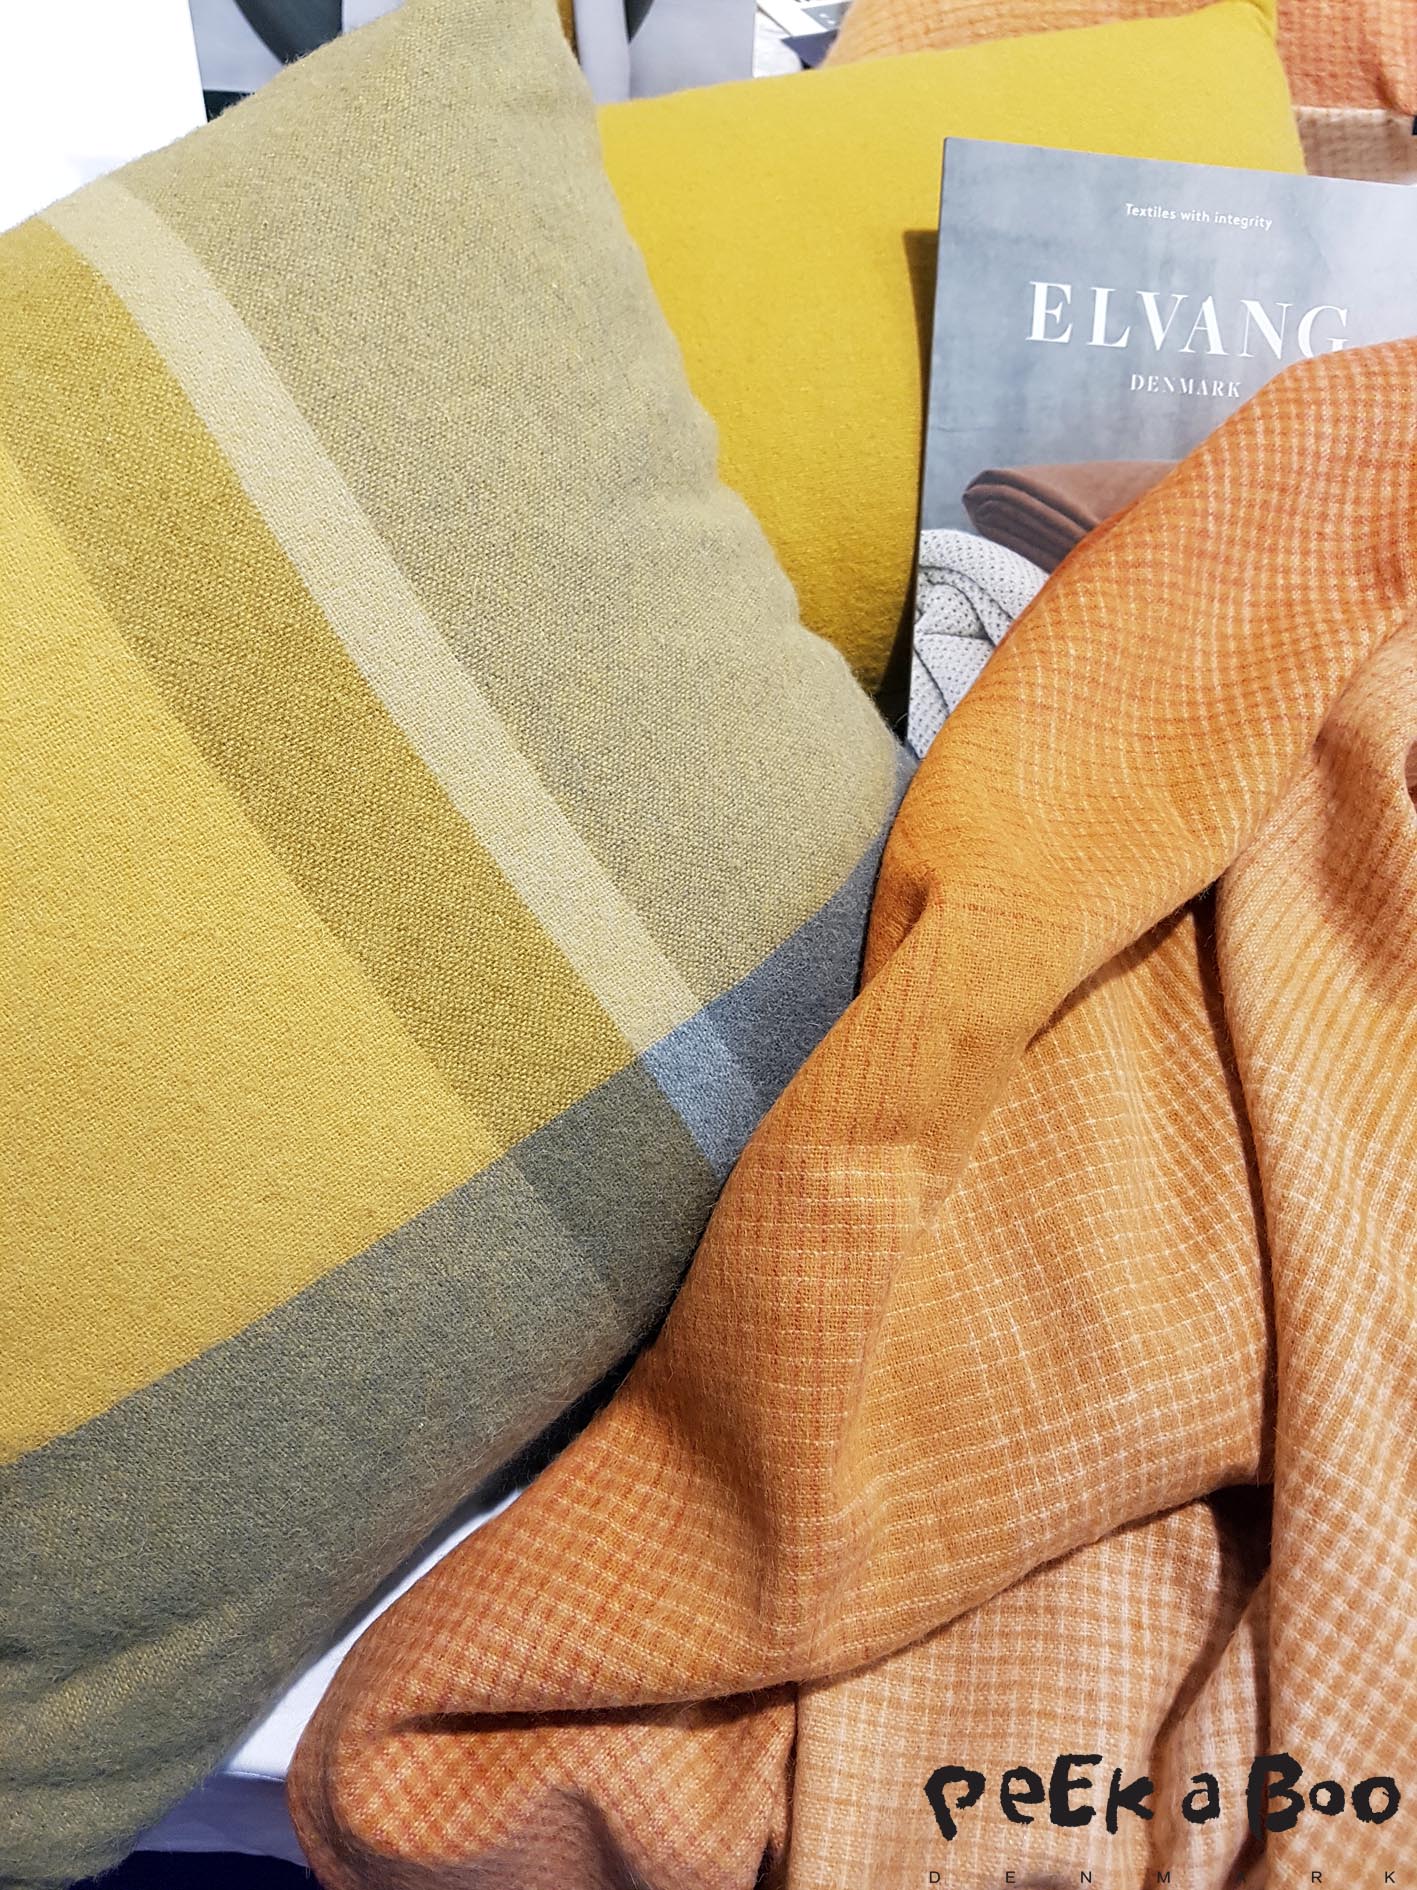 The Danish textile brand Elvang had different variations of the mustard colour woven as lovely soft plaids and cushions. Seen at Tendence in Frankfurt.